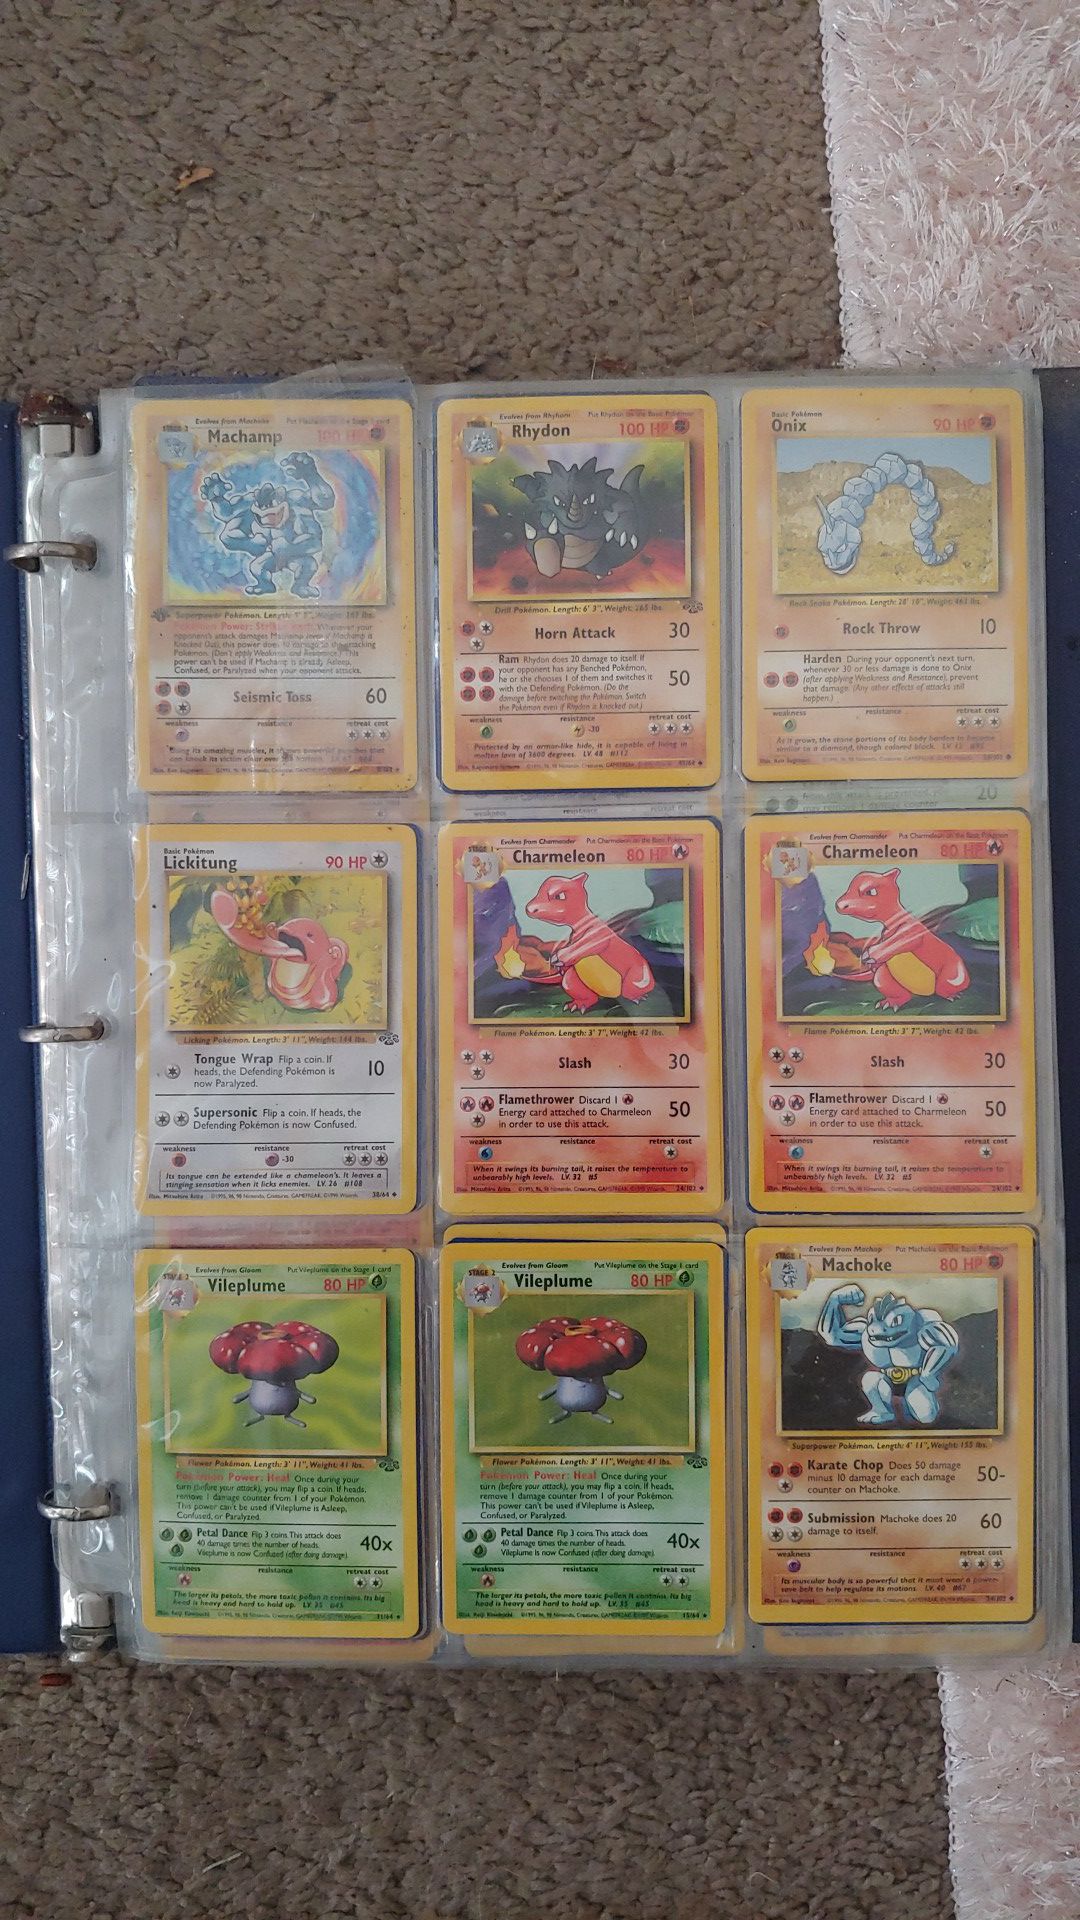 Over 150 Mint Condition Pokemon Card! They have been well preserved!